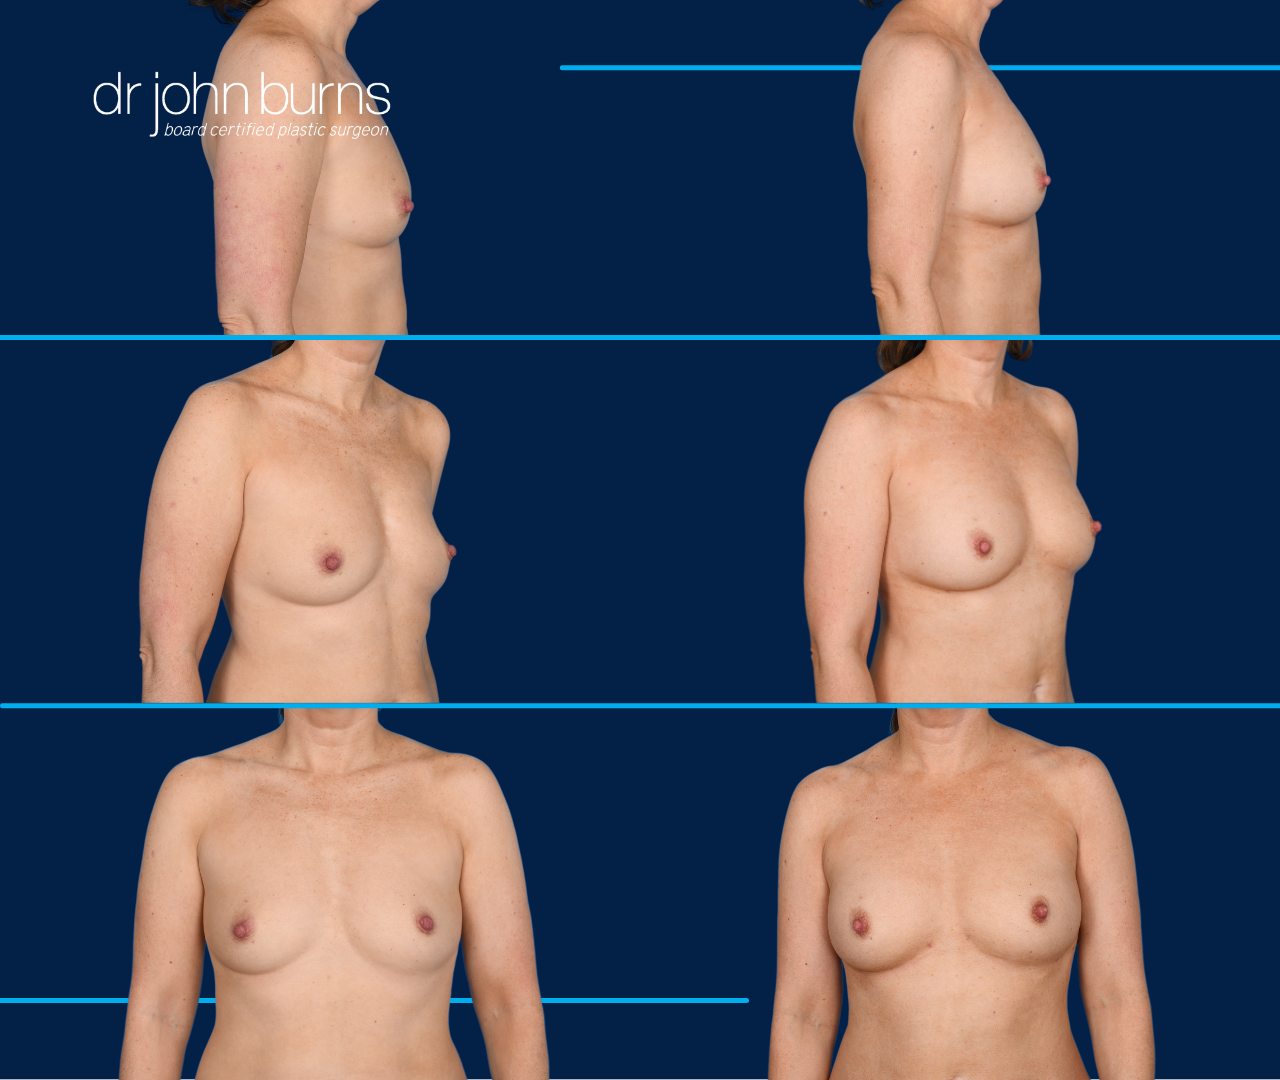 case 13- before and after breast augmentation fat transfer by top plastic surgeon, Dr. John Burns